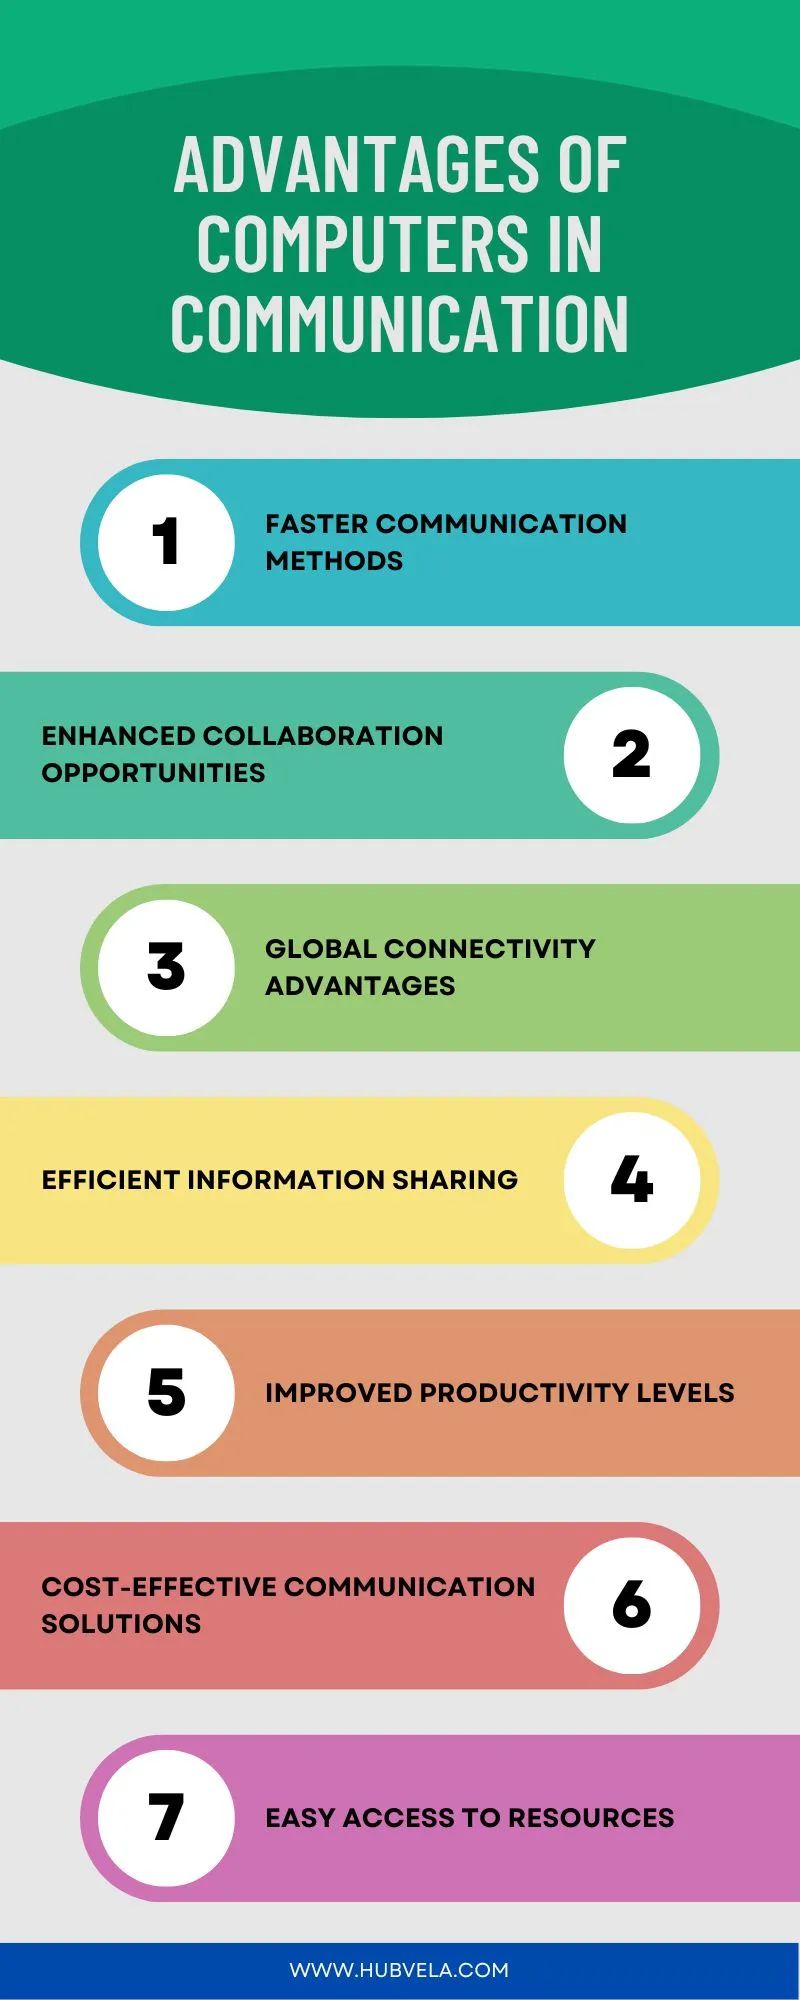 Advantages of Computers in Communication Infographic